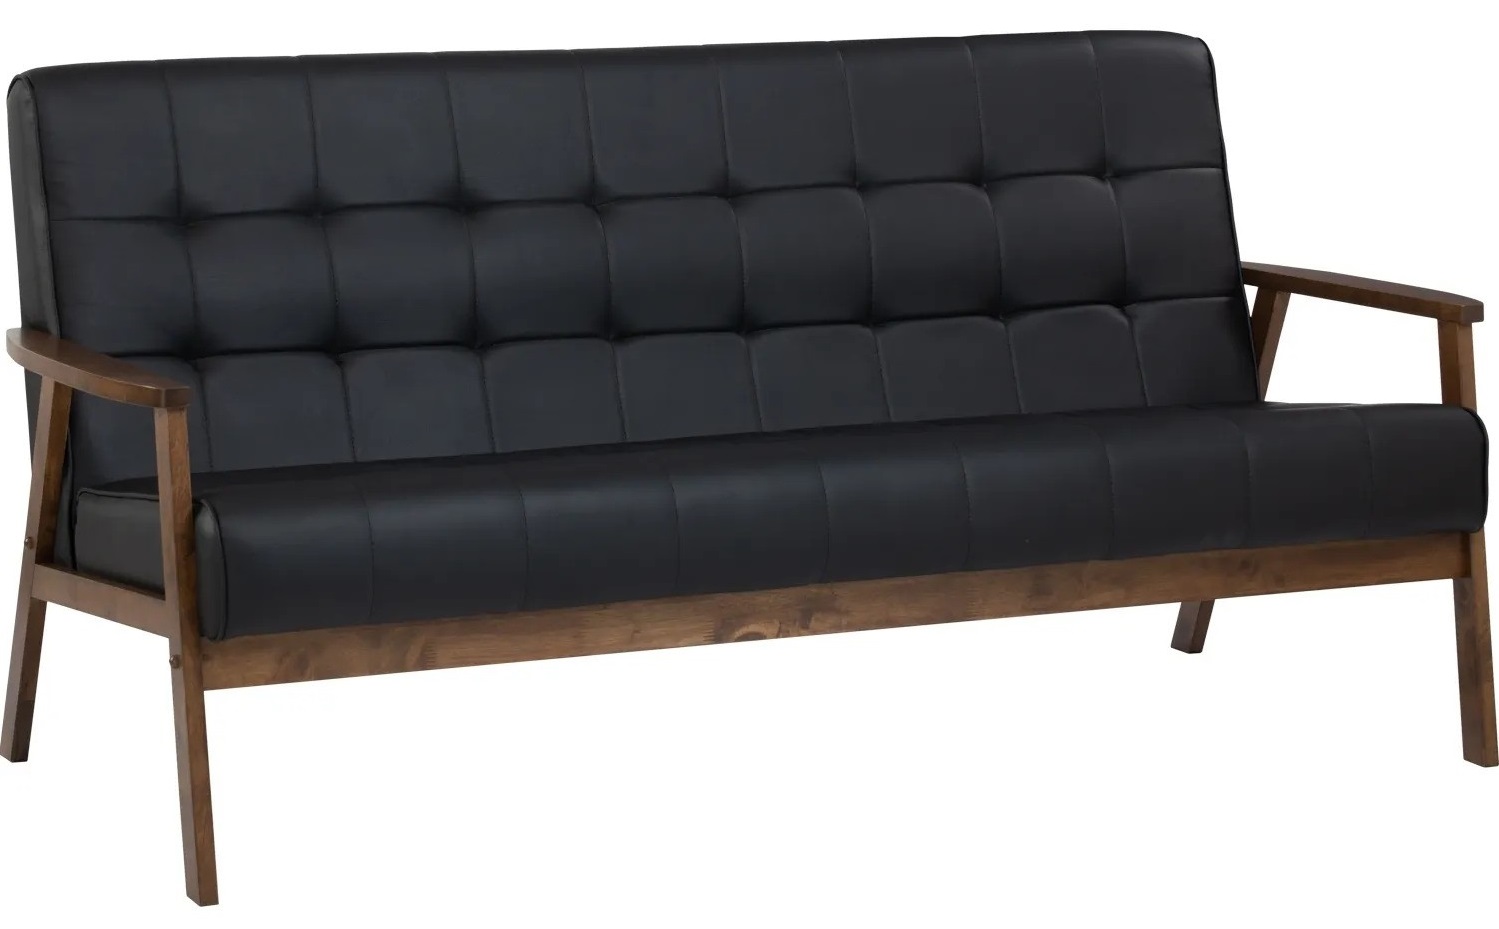 mid century black leather sofa with wooden tapered legs